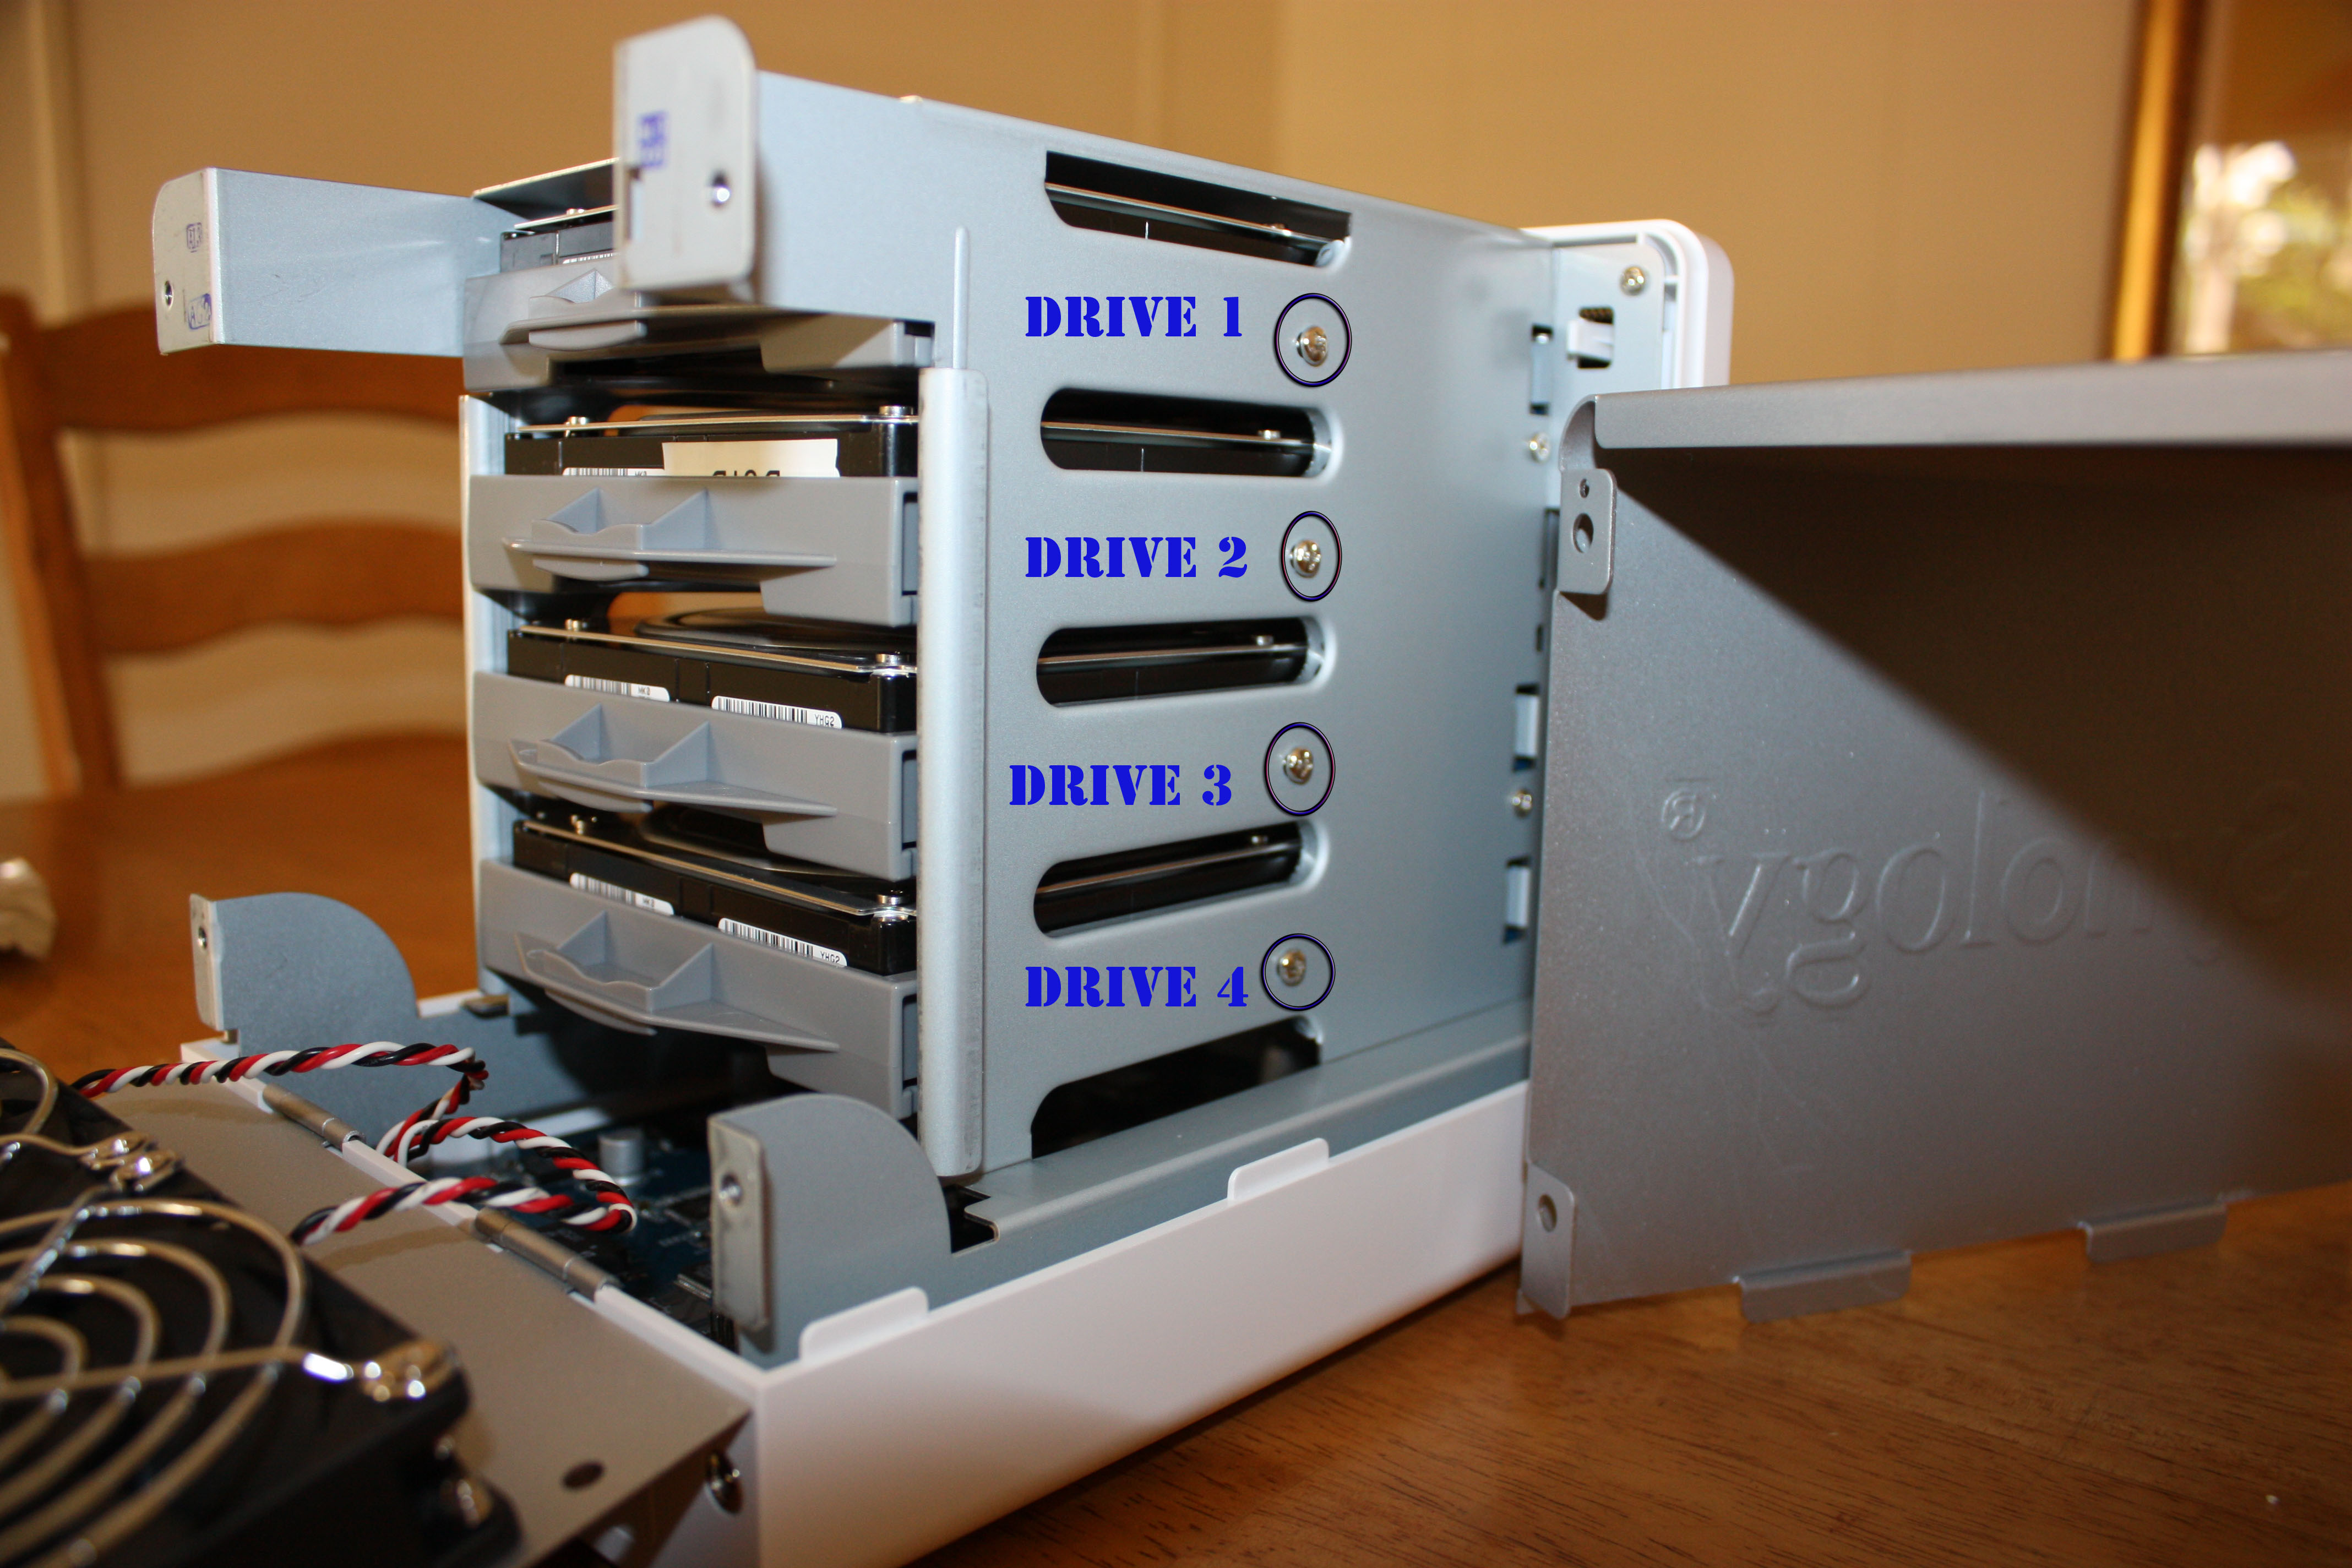 https://macsynology.files.wordpress.com/2011/05/synology-ds411j-drive-numbering-and-tray-screws.jpg